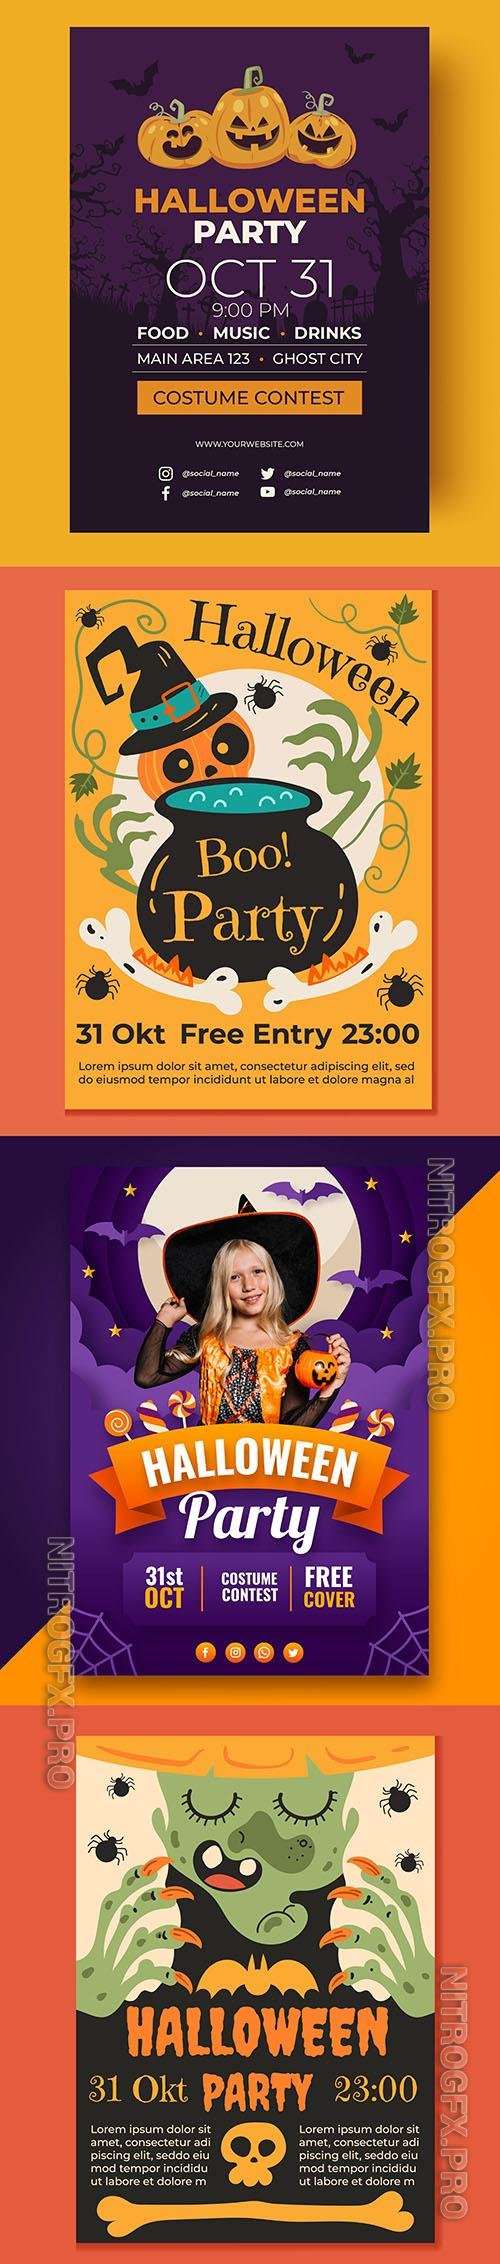 Realistic Halloween Party Vertical Flyer Template Vol 2